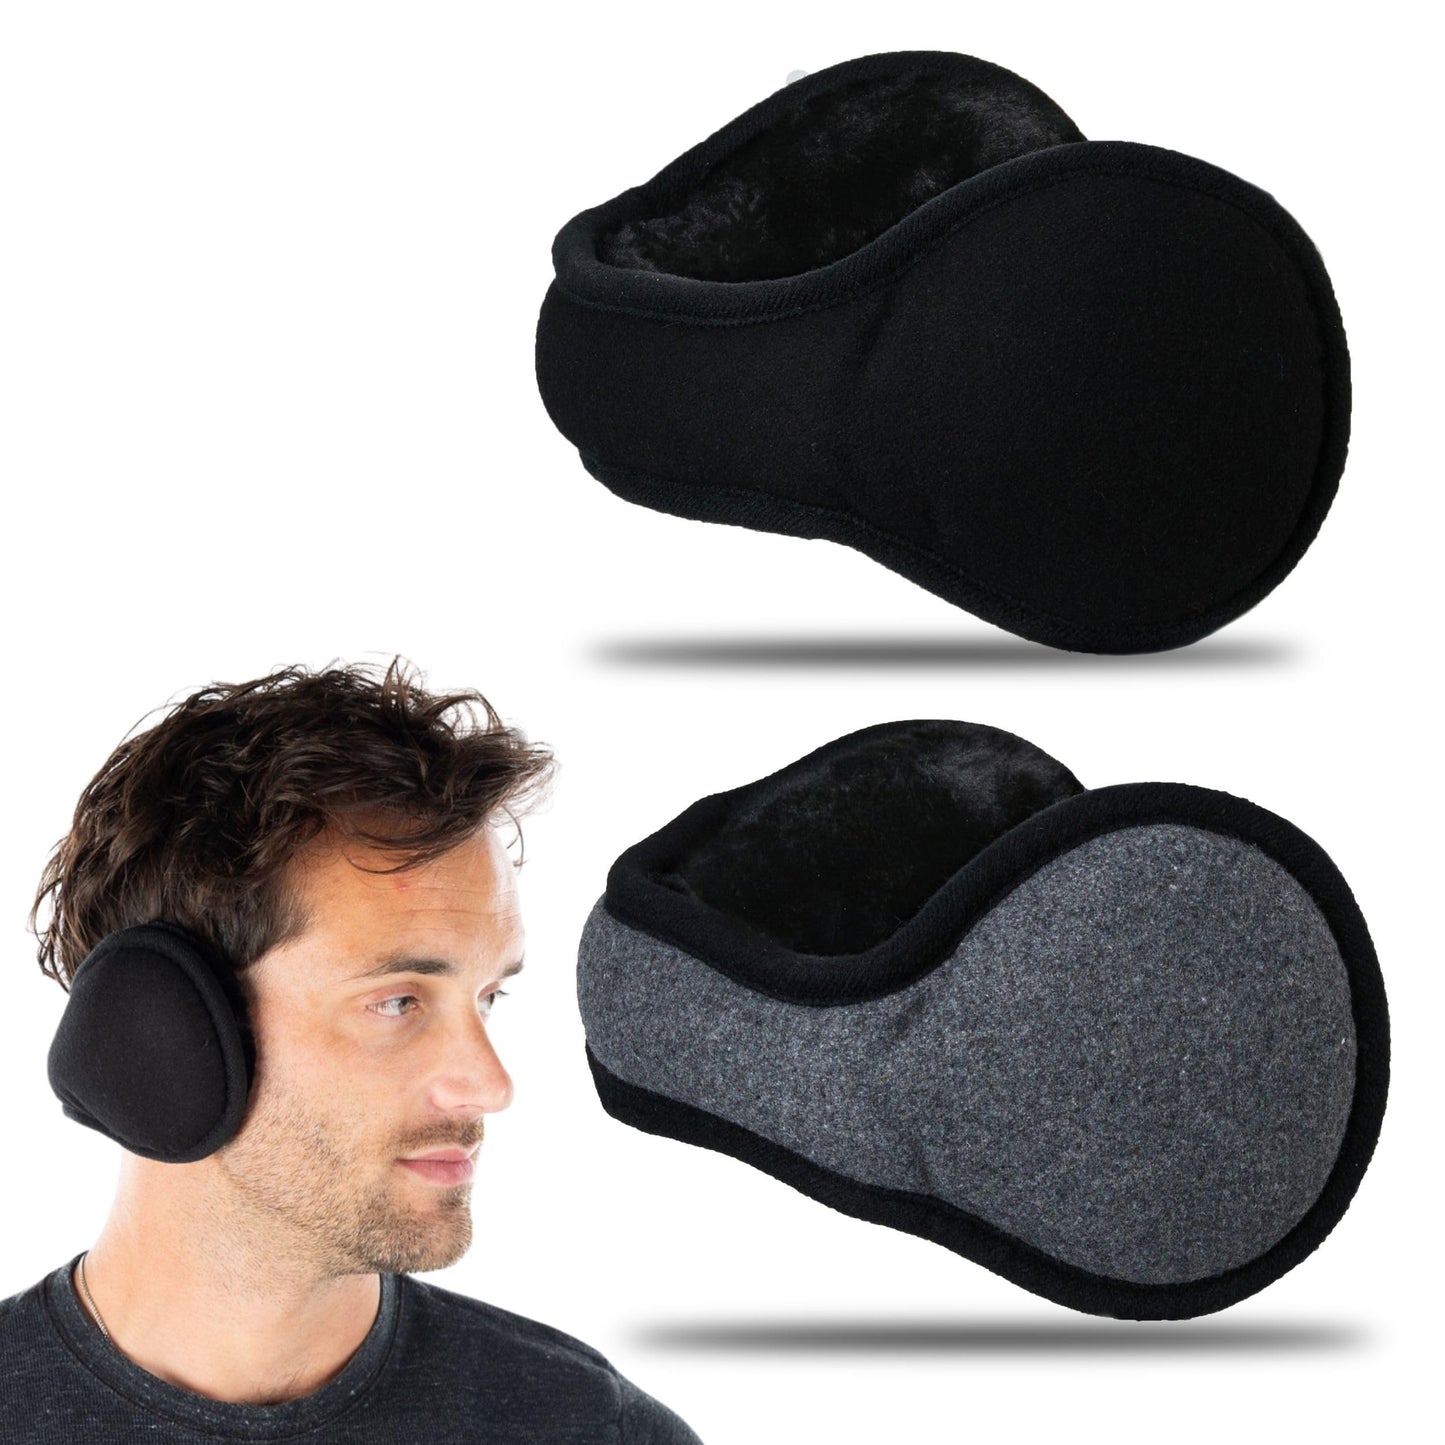 Adjustable Ear Muffs by Funky Junque